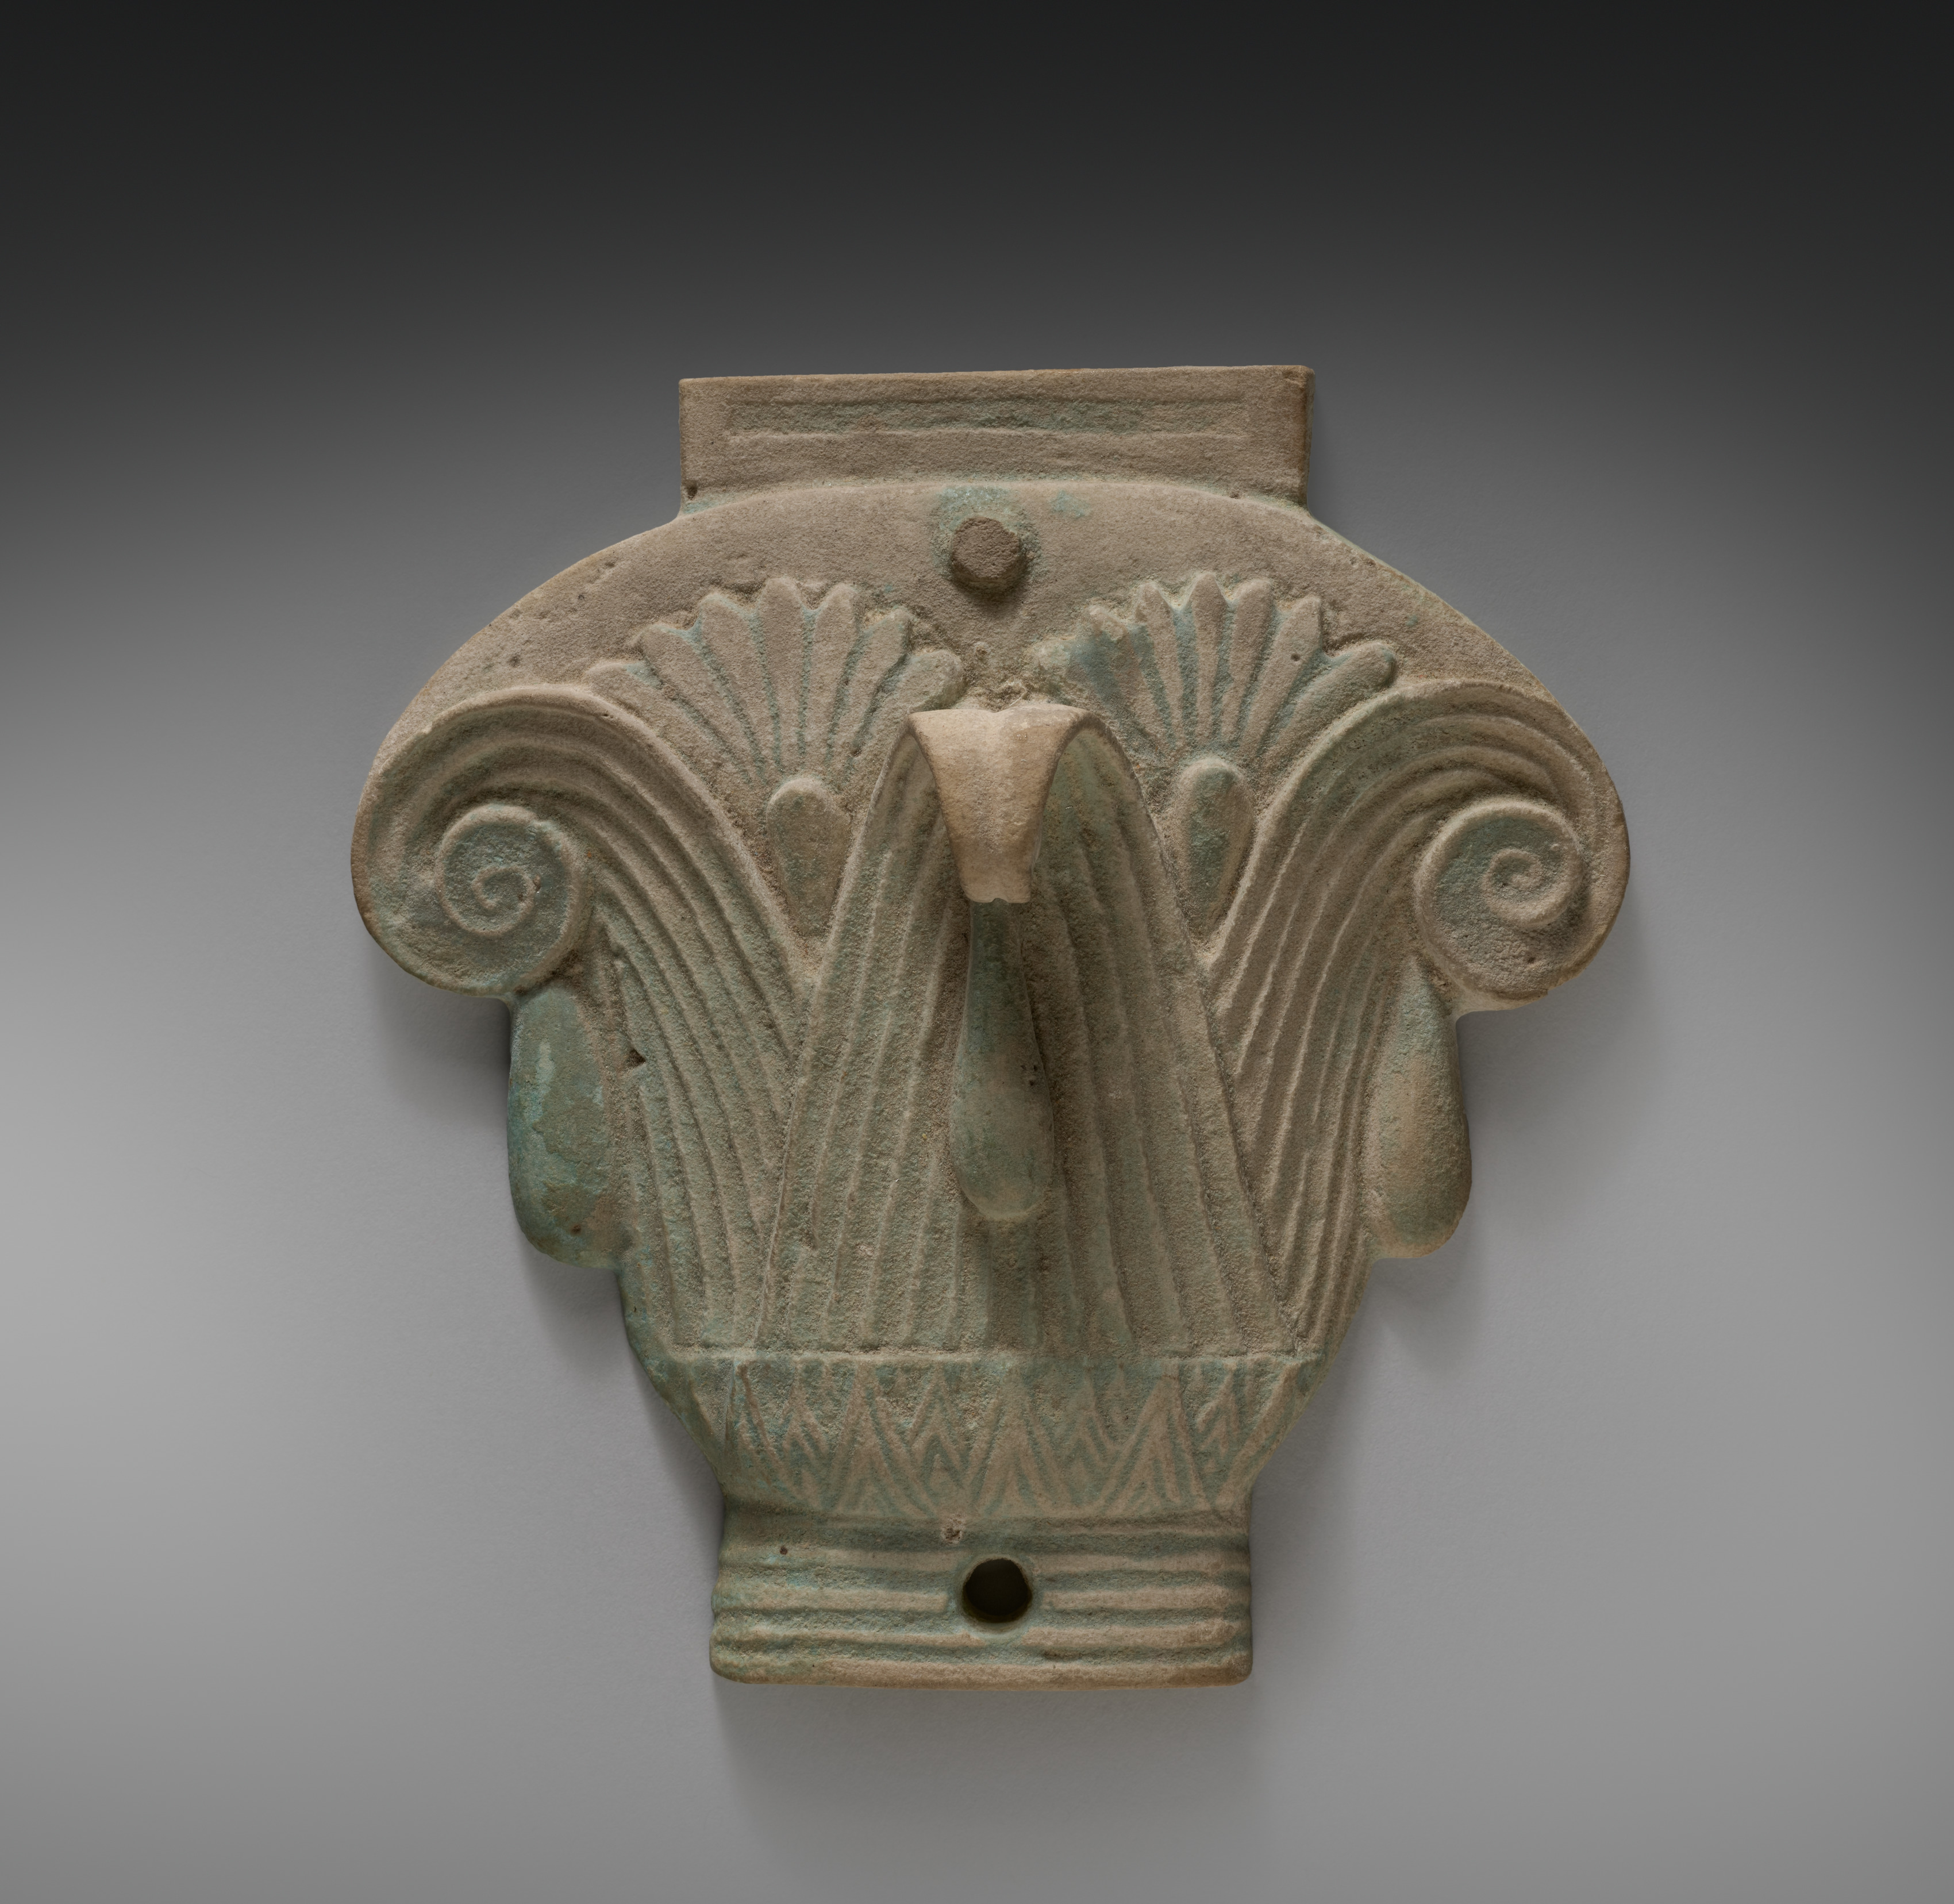 Box (Pyxis) in the Form of a Composite Capital (lid)